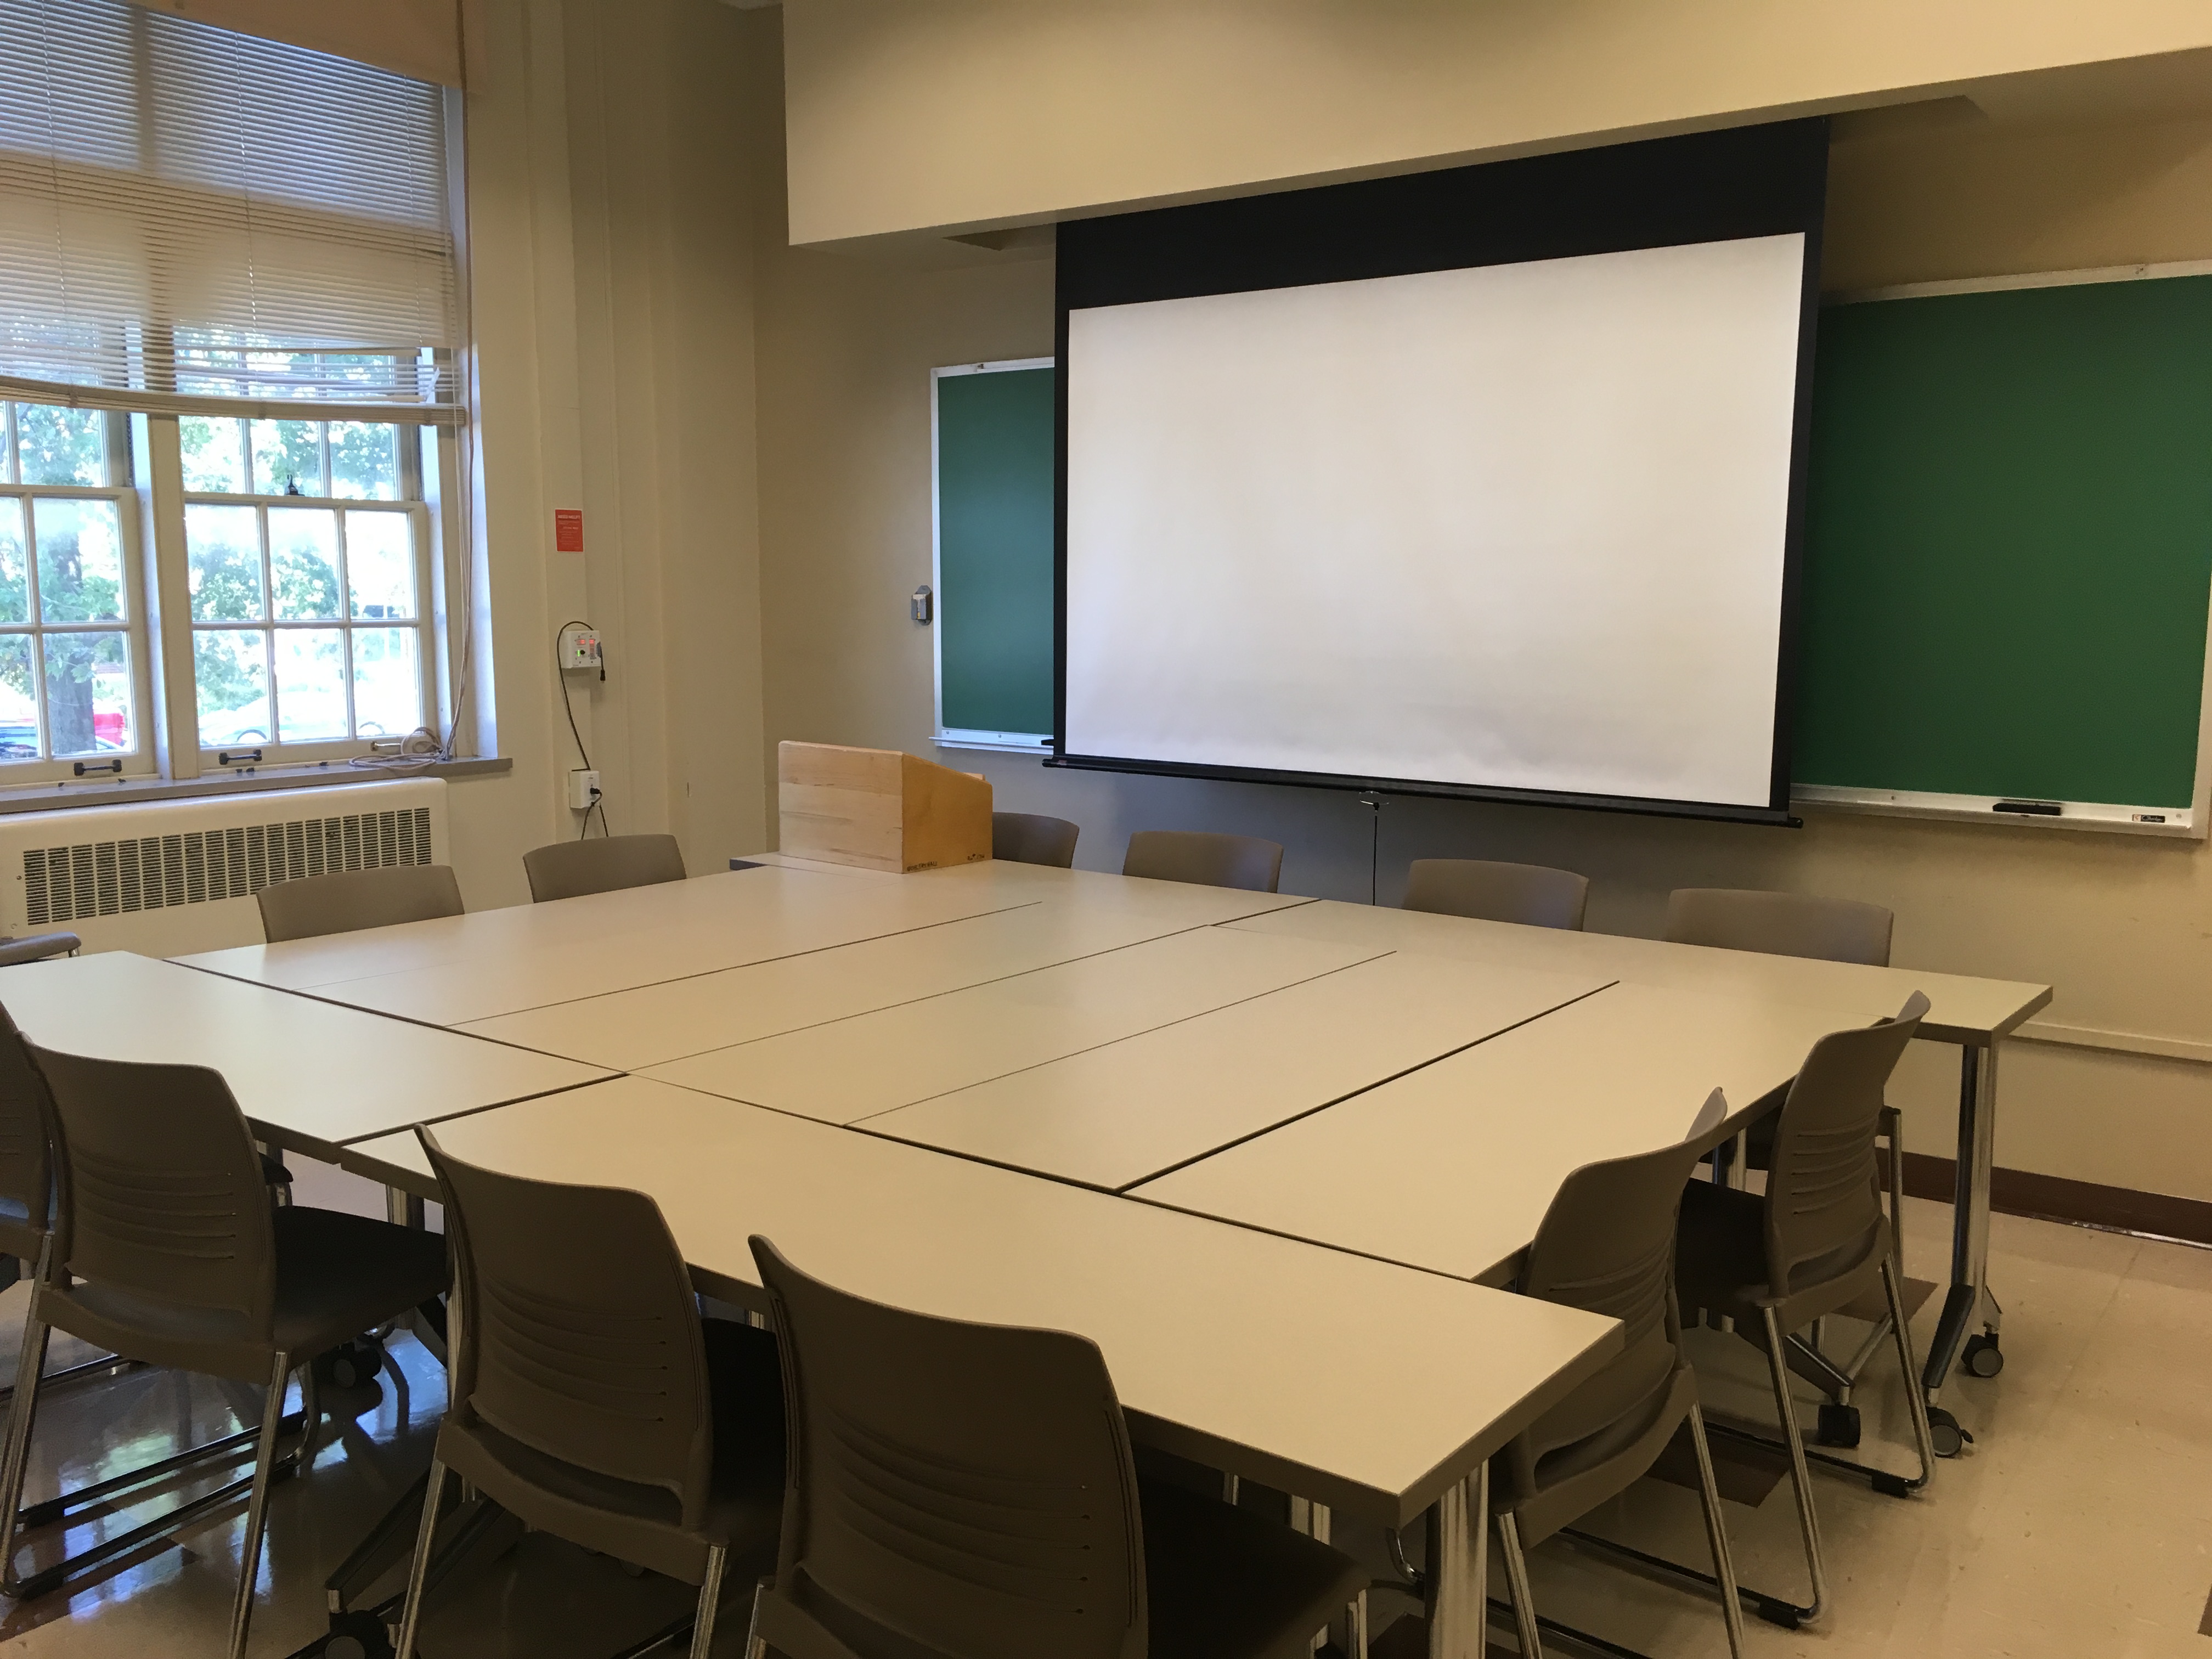 This is a view of the room, with student desks, and a chalkboard.